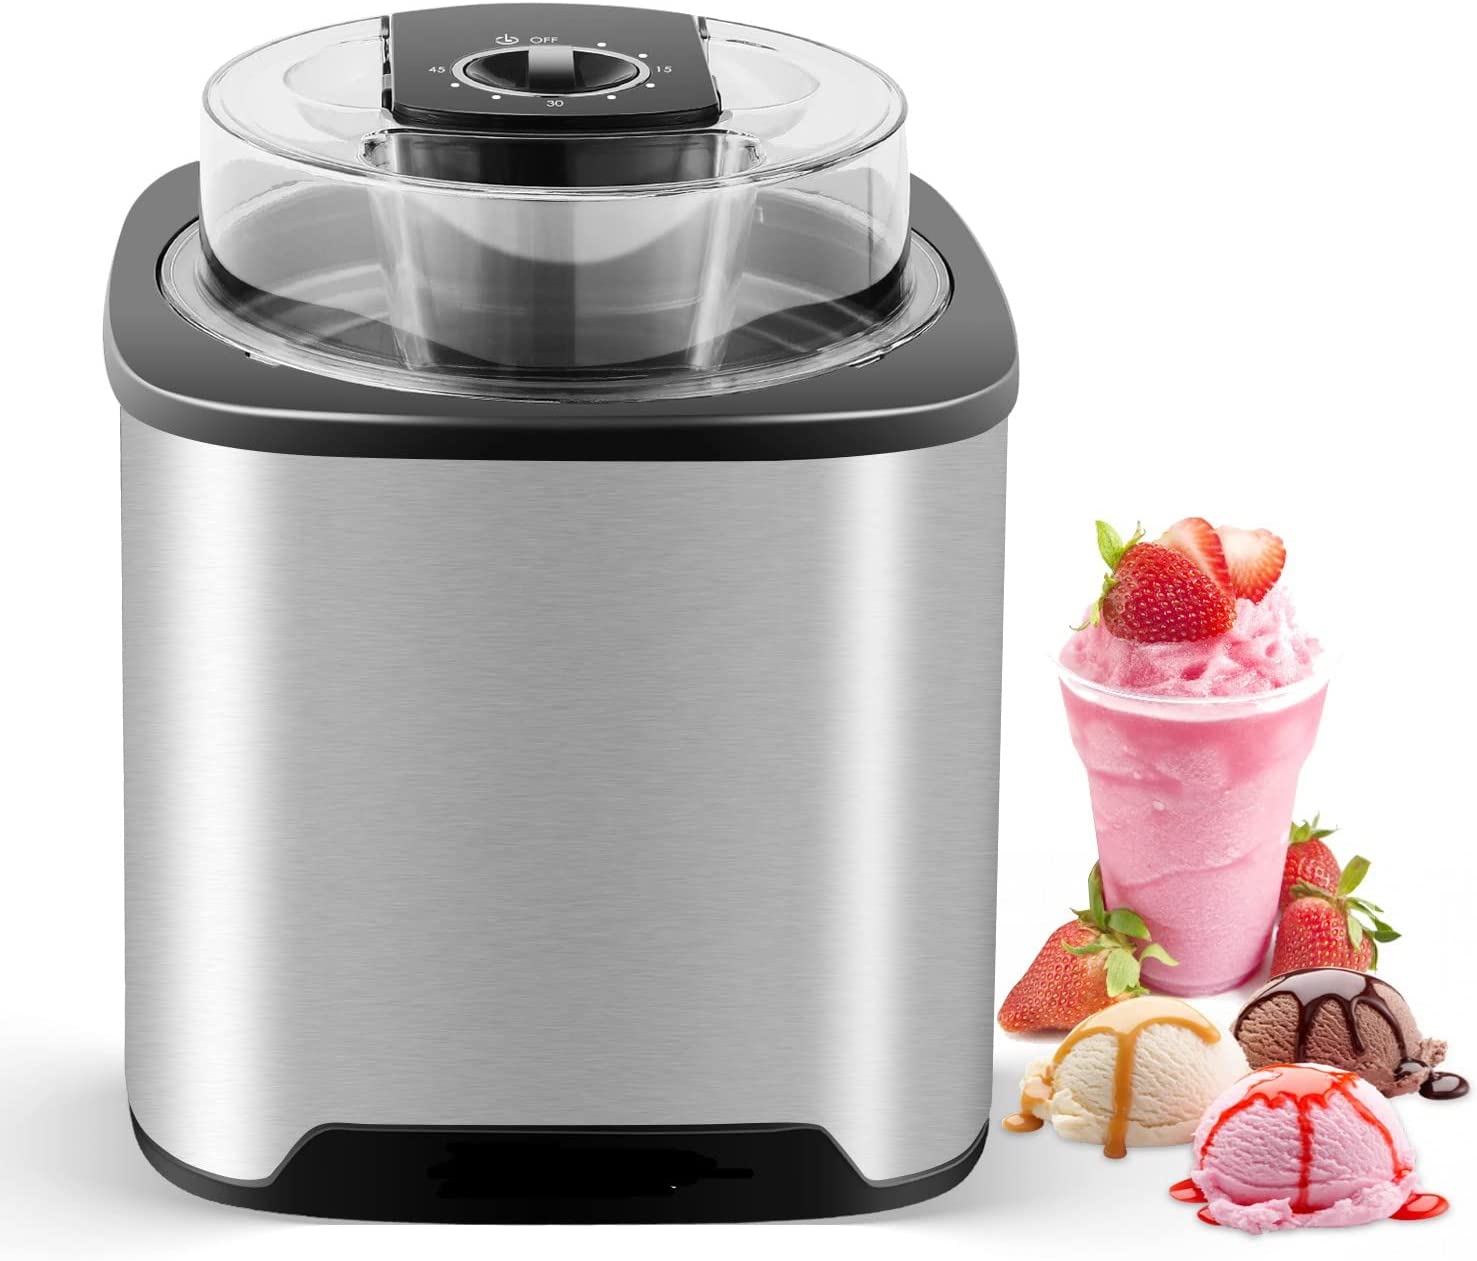 Ice Cream Maker 2l Stainless Steel Food Ice Cream Maker 22 x 22 x 24 cm one button Operation for Ice Cream, Frozen Yoghurt and Sorbet, Removable, Easy to Clean